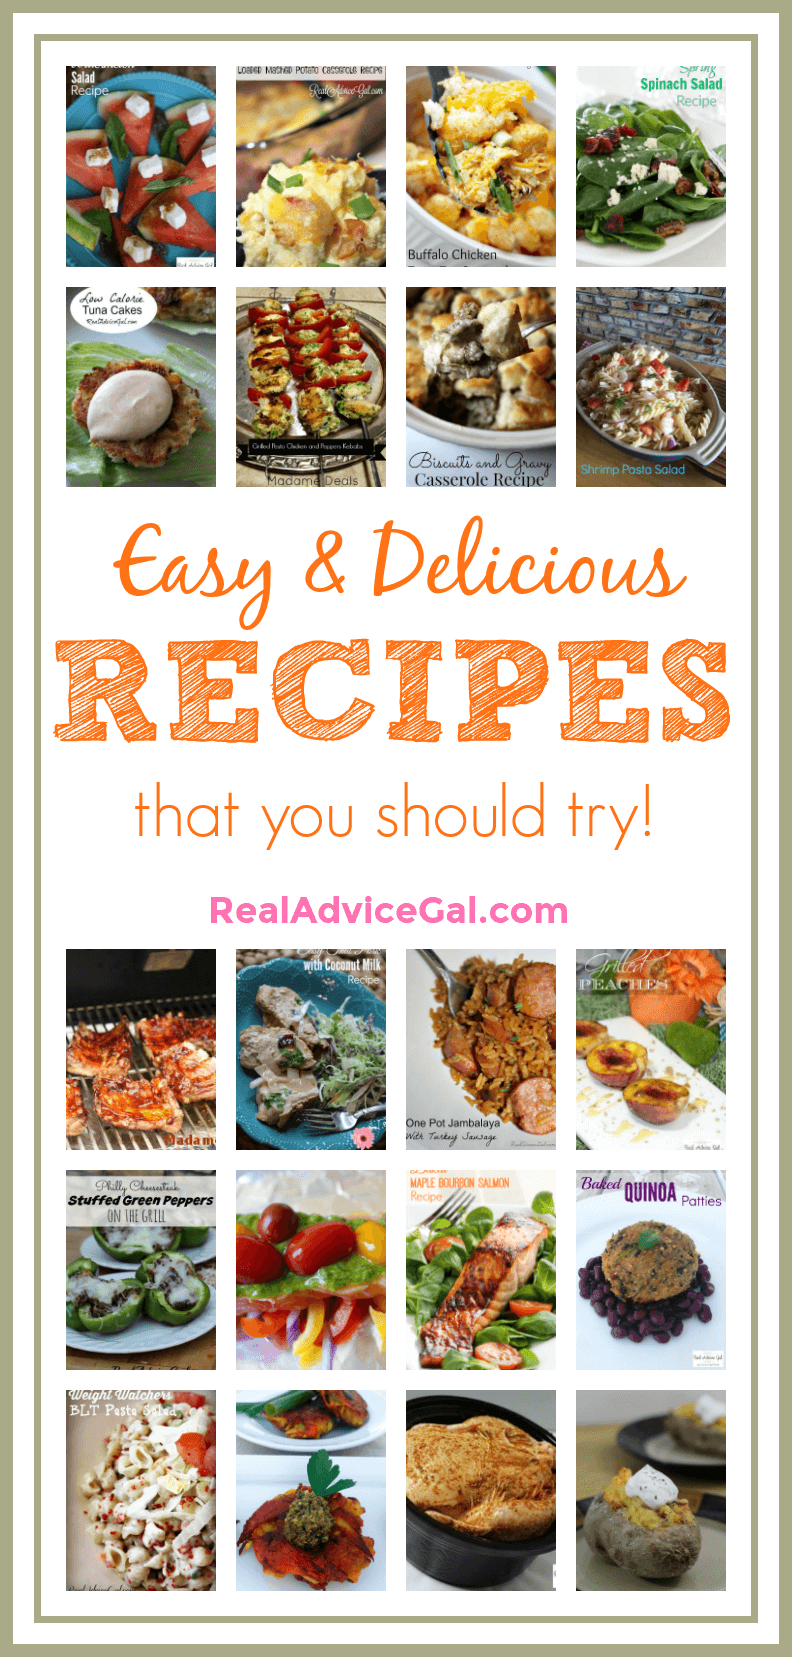 You have to try these delicious and easy recipes for your family. Make sure to save and pin these now!